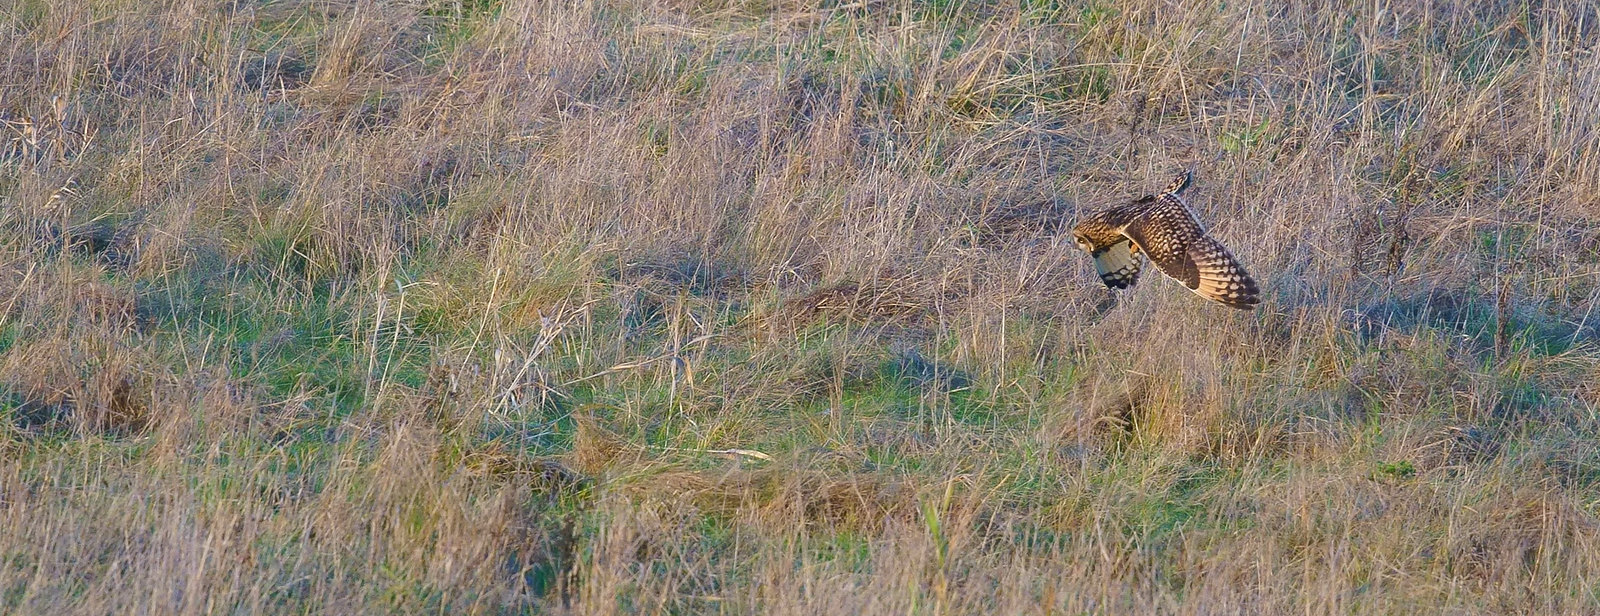 SE Owl/s - always distant, but interesting in the evening light...